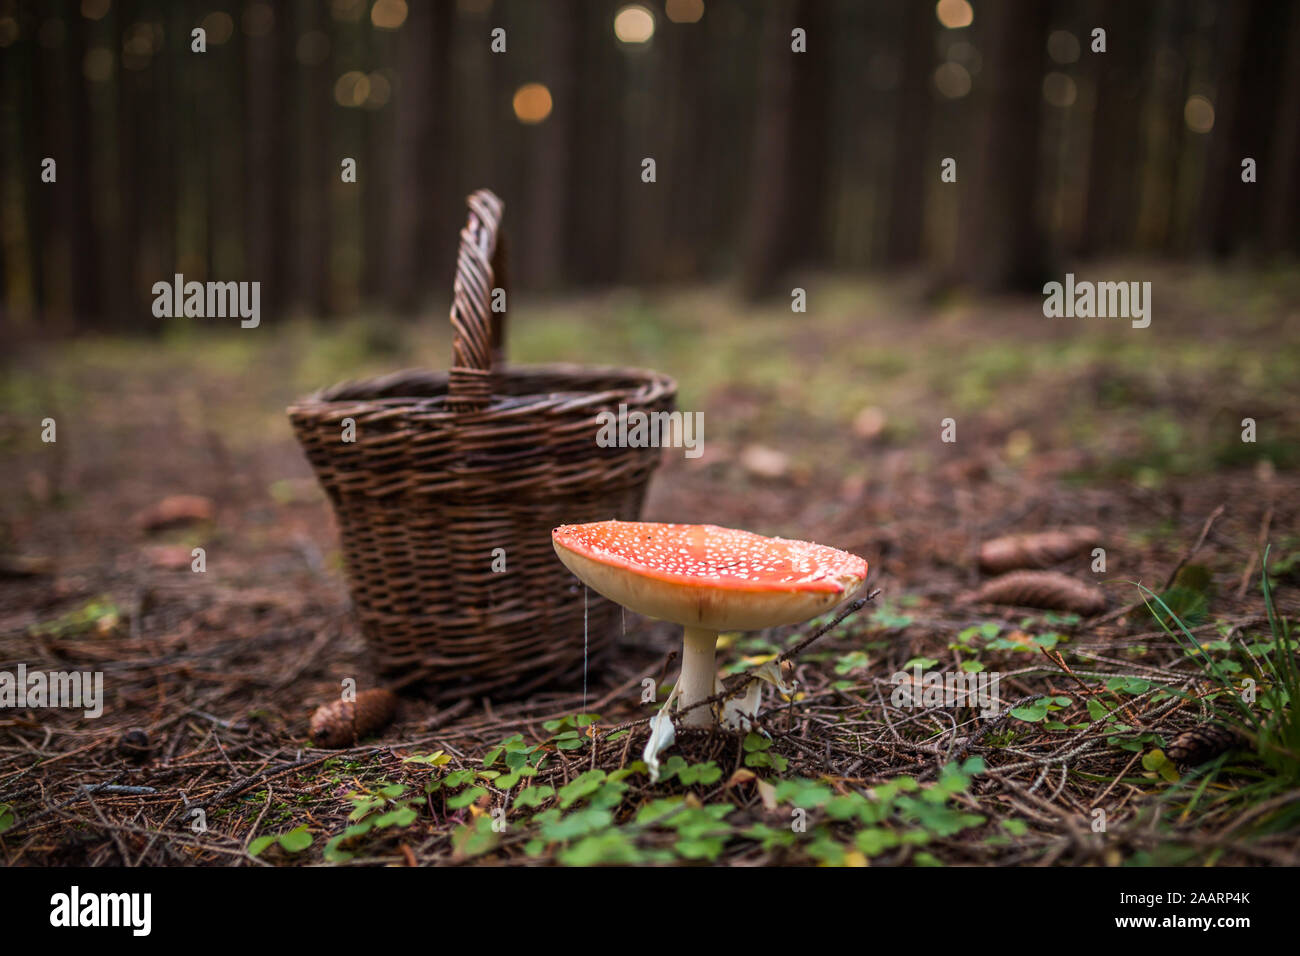 Poisonous mushroom Amanita muscaria next to basket in forrest, concept of mushroom hunter. Warning, inedible. Stock Photo